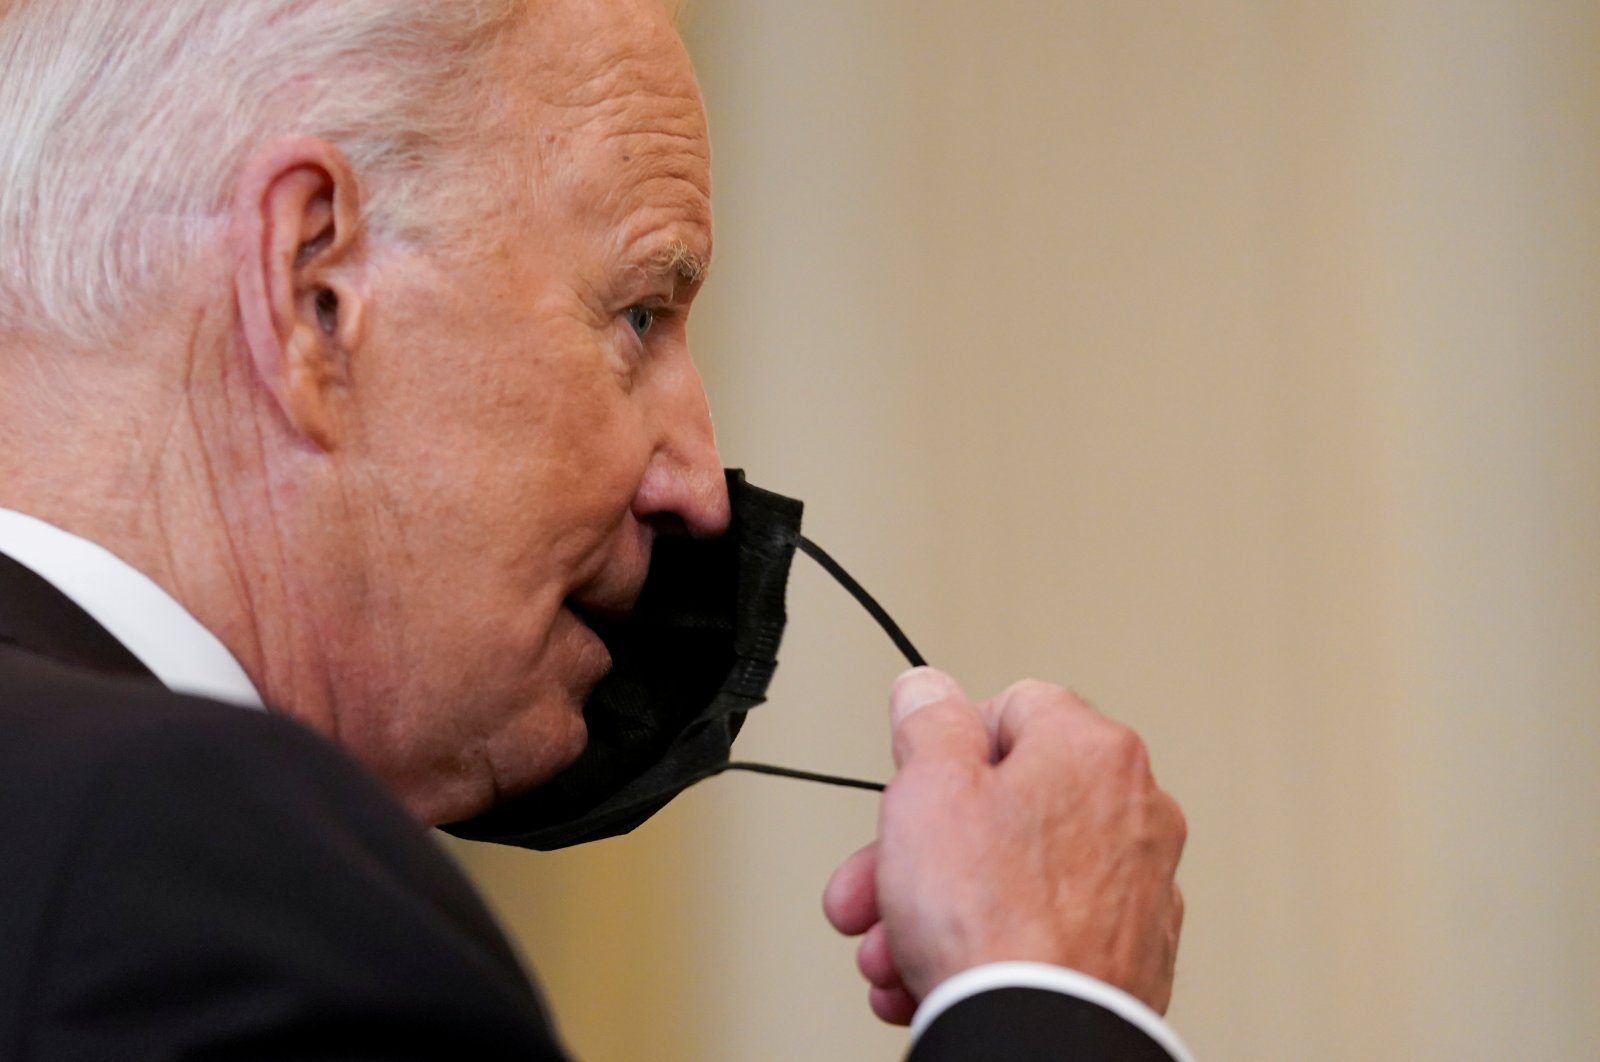 U.S. President Joe Biden takes off his face mask before delivering remarks on the delta variant and his administration's efforts to increase vaccinations, from the State Dining Room of the White House in Washington D.C., U.S., Sept. 9, 2021. (Reuters Photo)